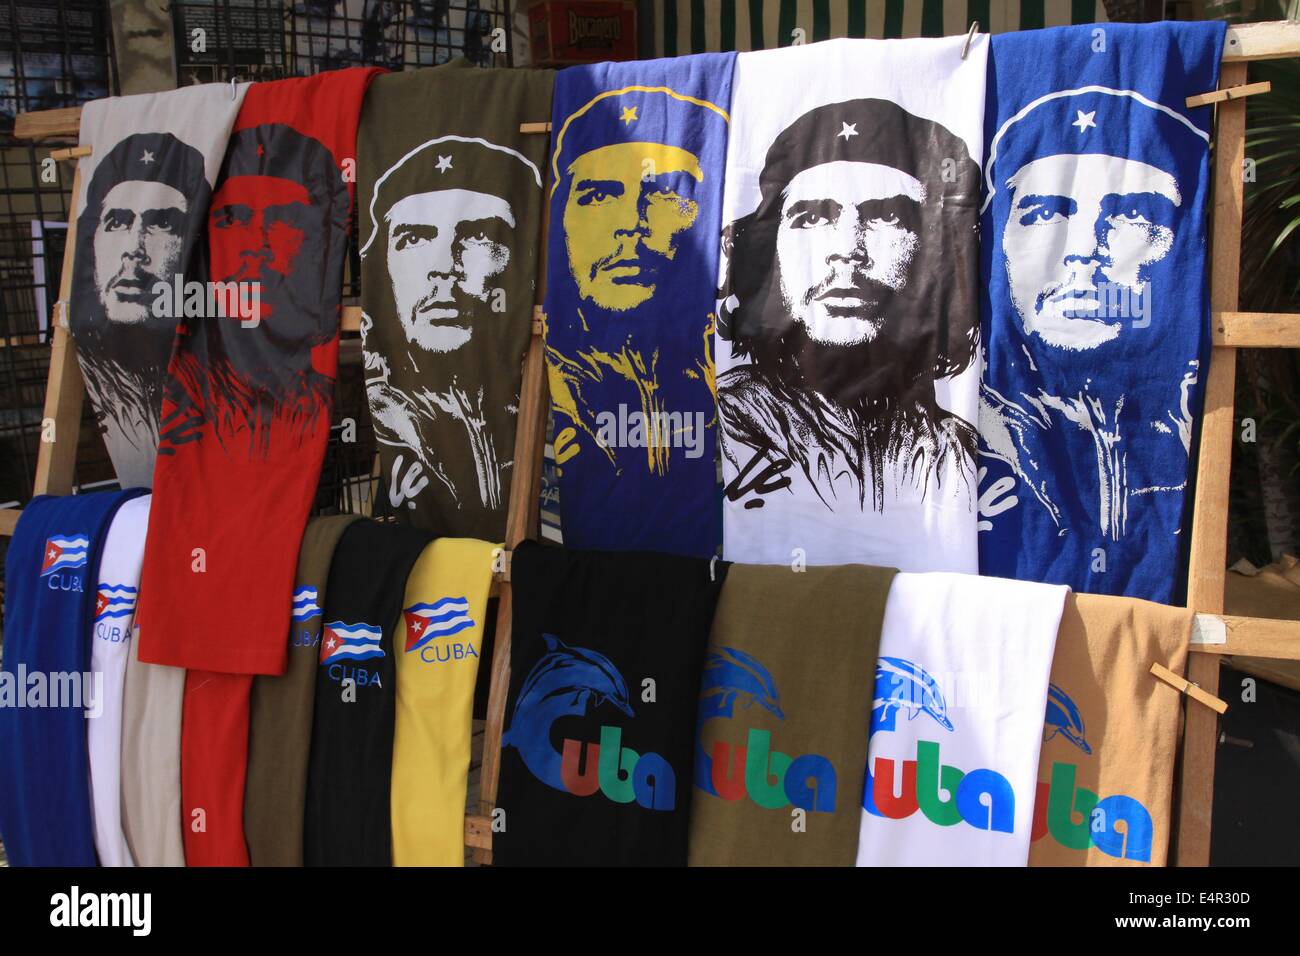 Typical Cuban souvenirs like t-shirts with a portrait of Che Guevara at a market in Guardalavaca, Cuba, 22 April 2014. Photo: Peter Zimmermann -NO WIRE SERVICE- Stock Photo